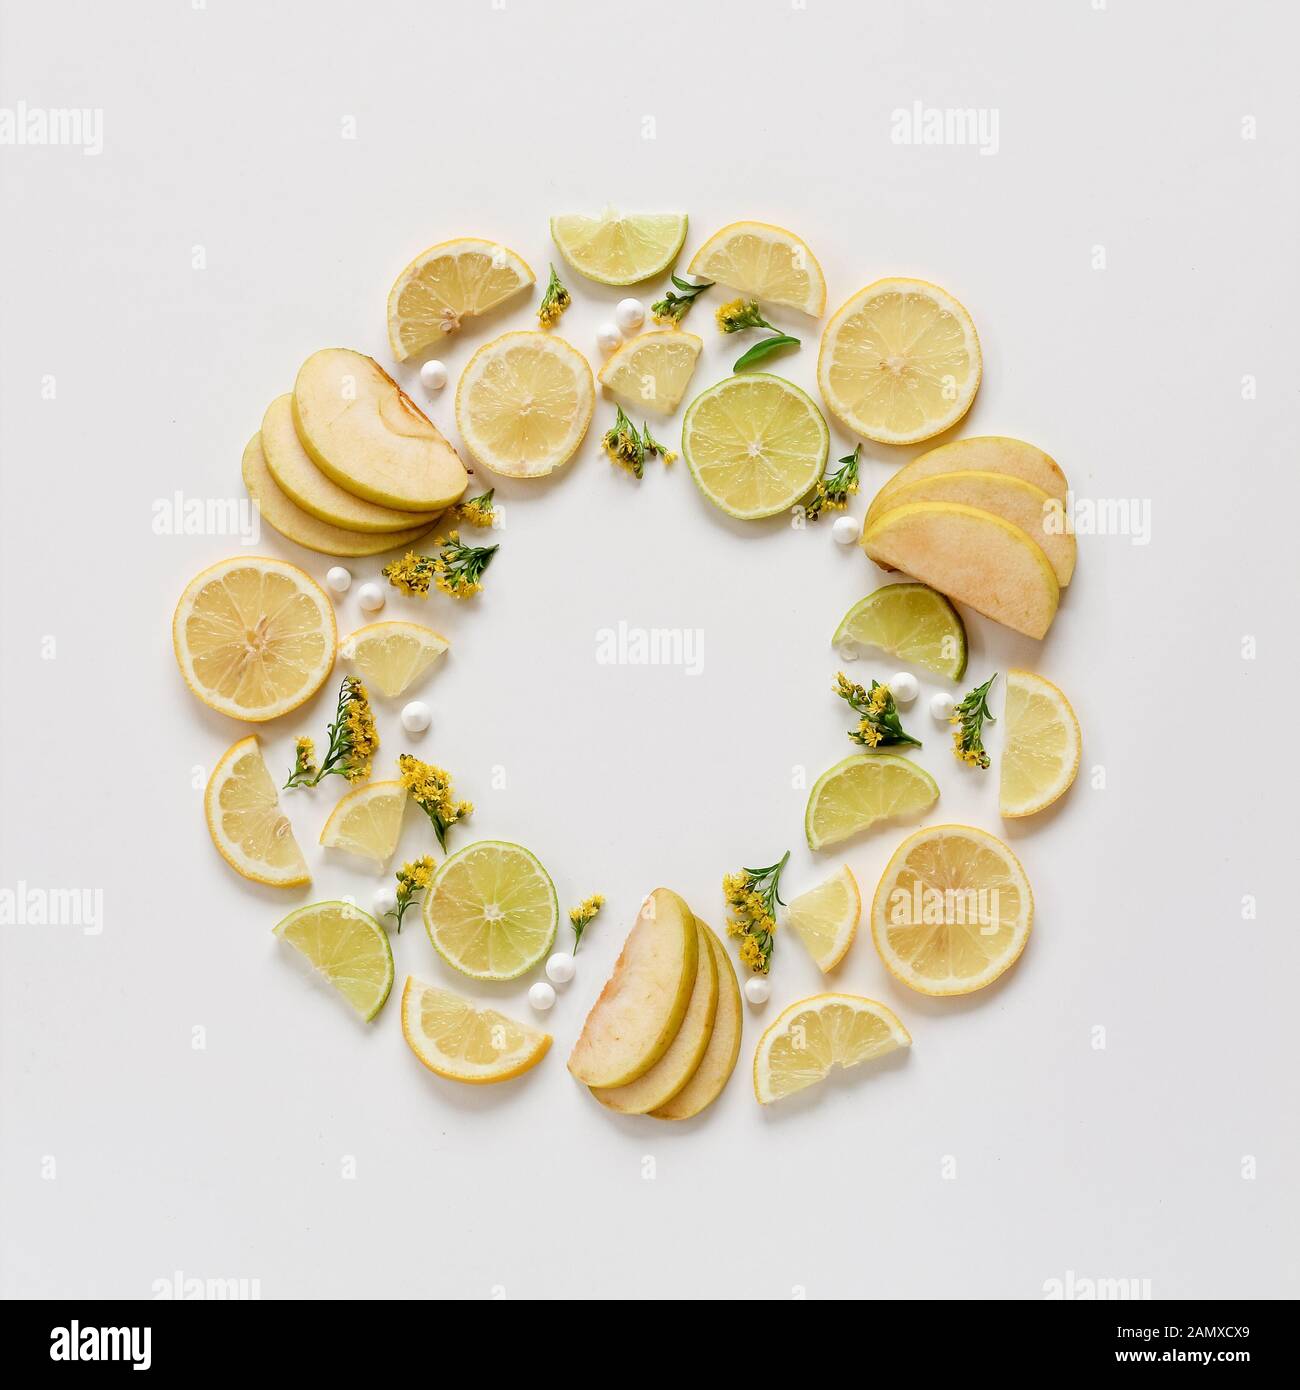 Creative pattern of sliced fruits and yellow blooms. Green apple, green and yellow lemons arranged in a circle. Flat lay with copy space Stock Photo